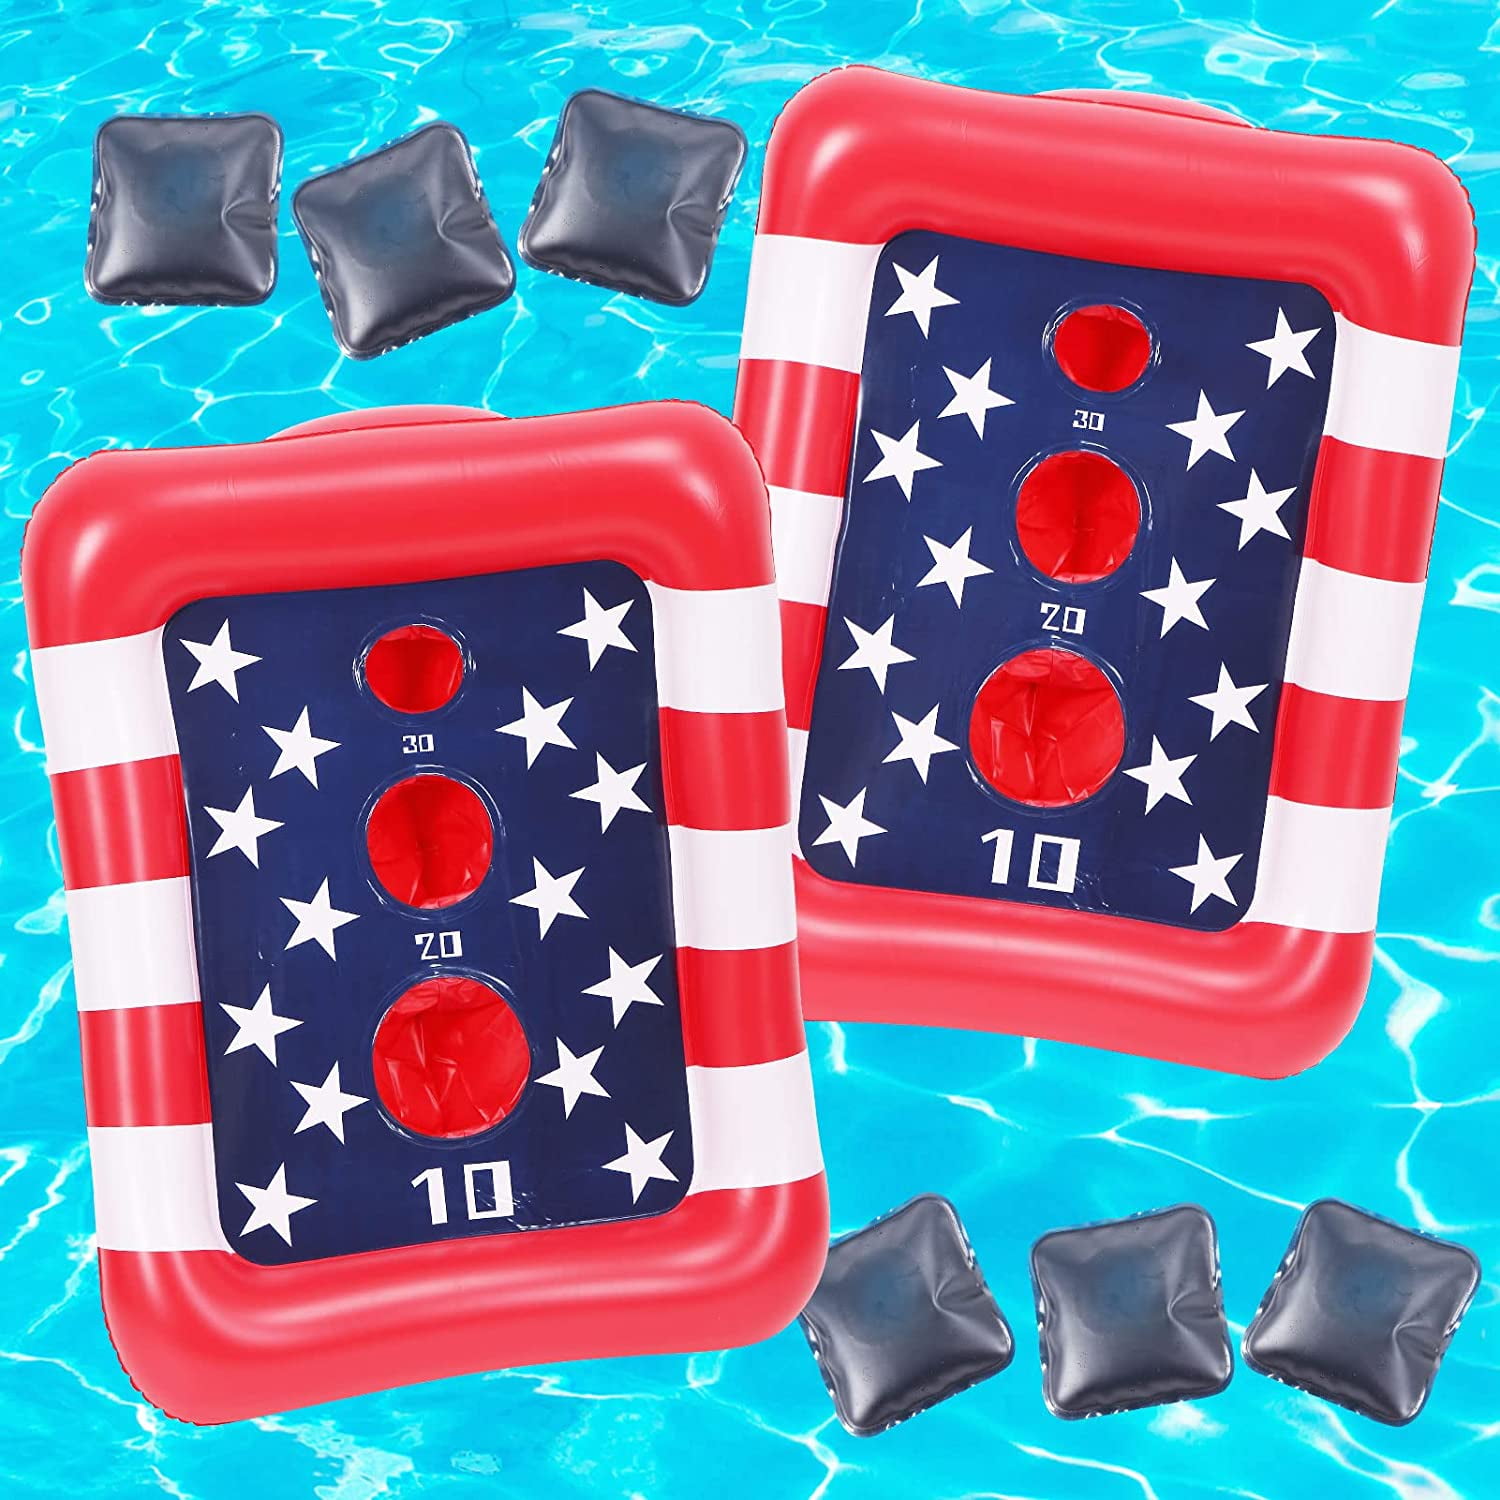 Inflatable Pool Toss Games Floating Cornhole Toss Set Corn-Toss Board & Floating Bean Bags for Pool Lawn,Bean Bags Toss Game for Kids Toddler Adult 2 Sets 